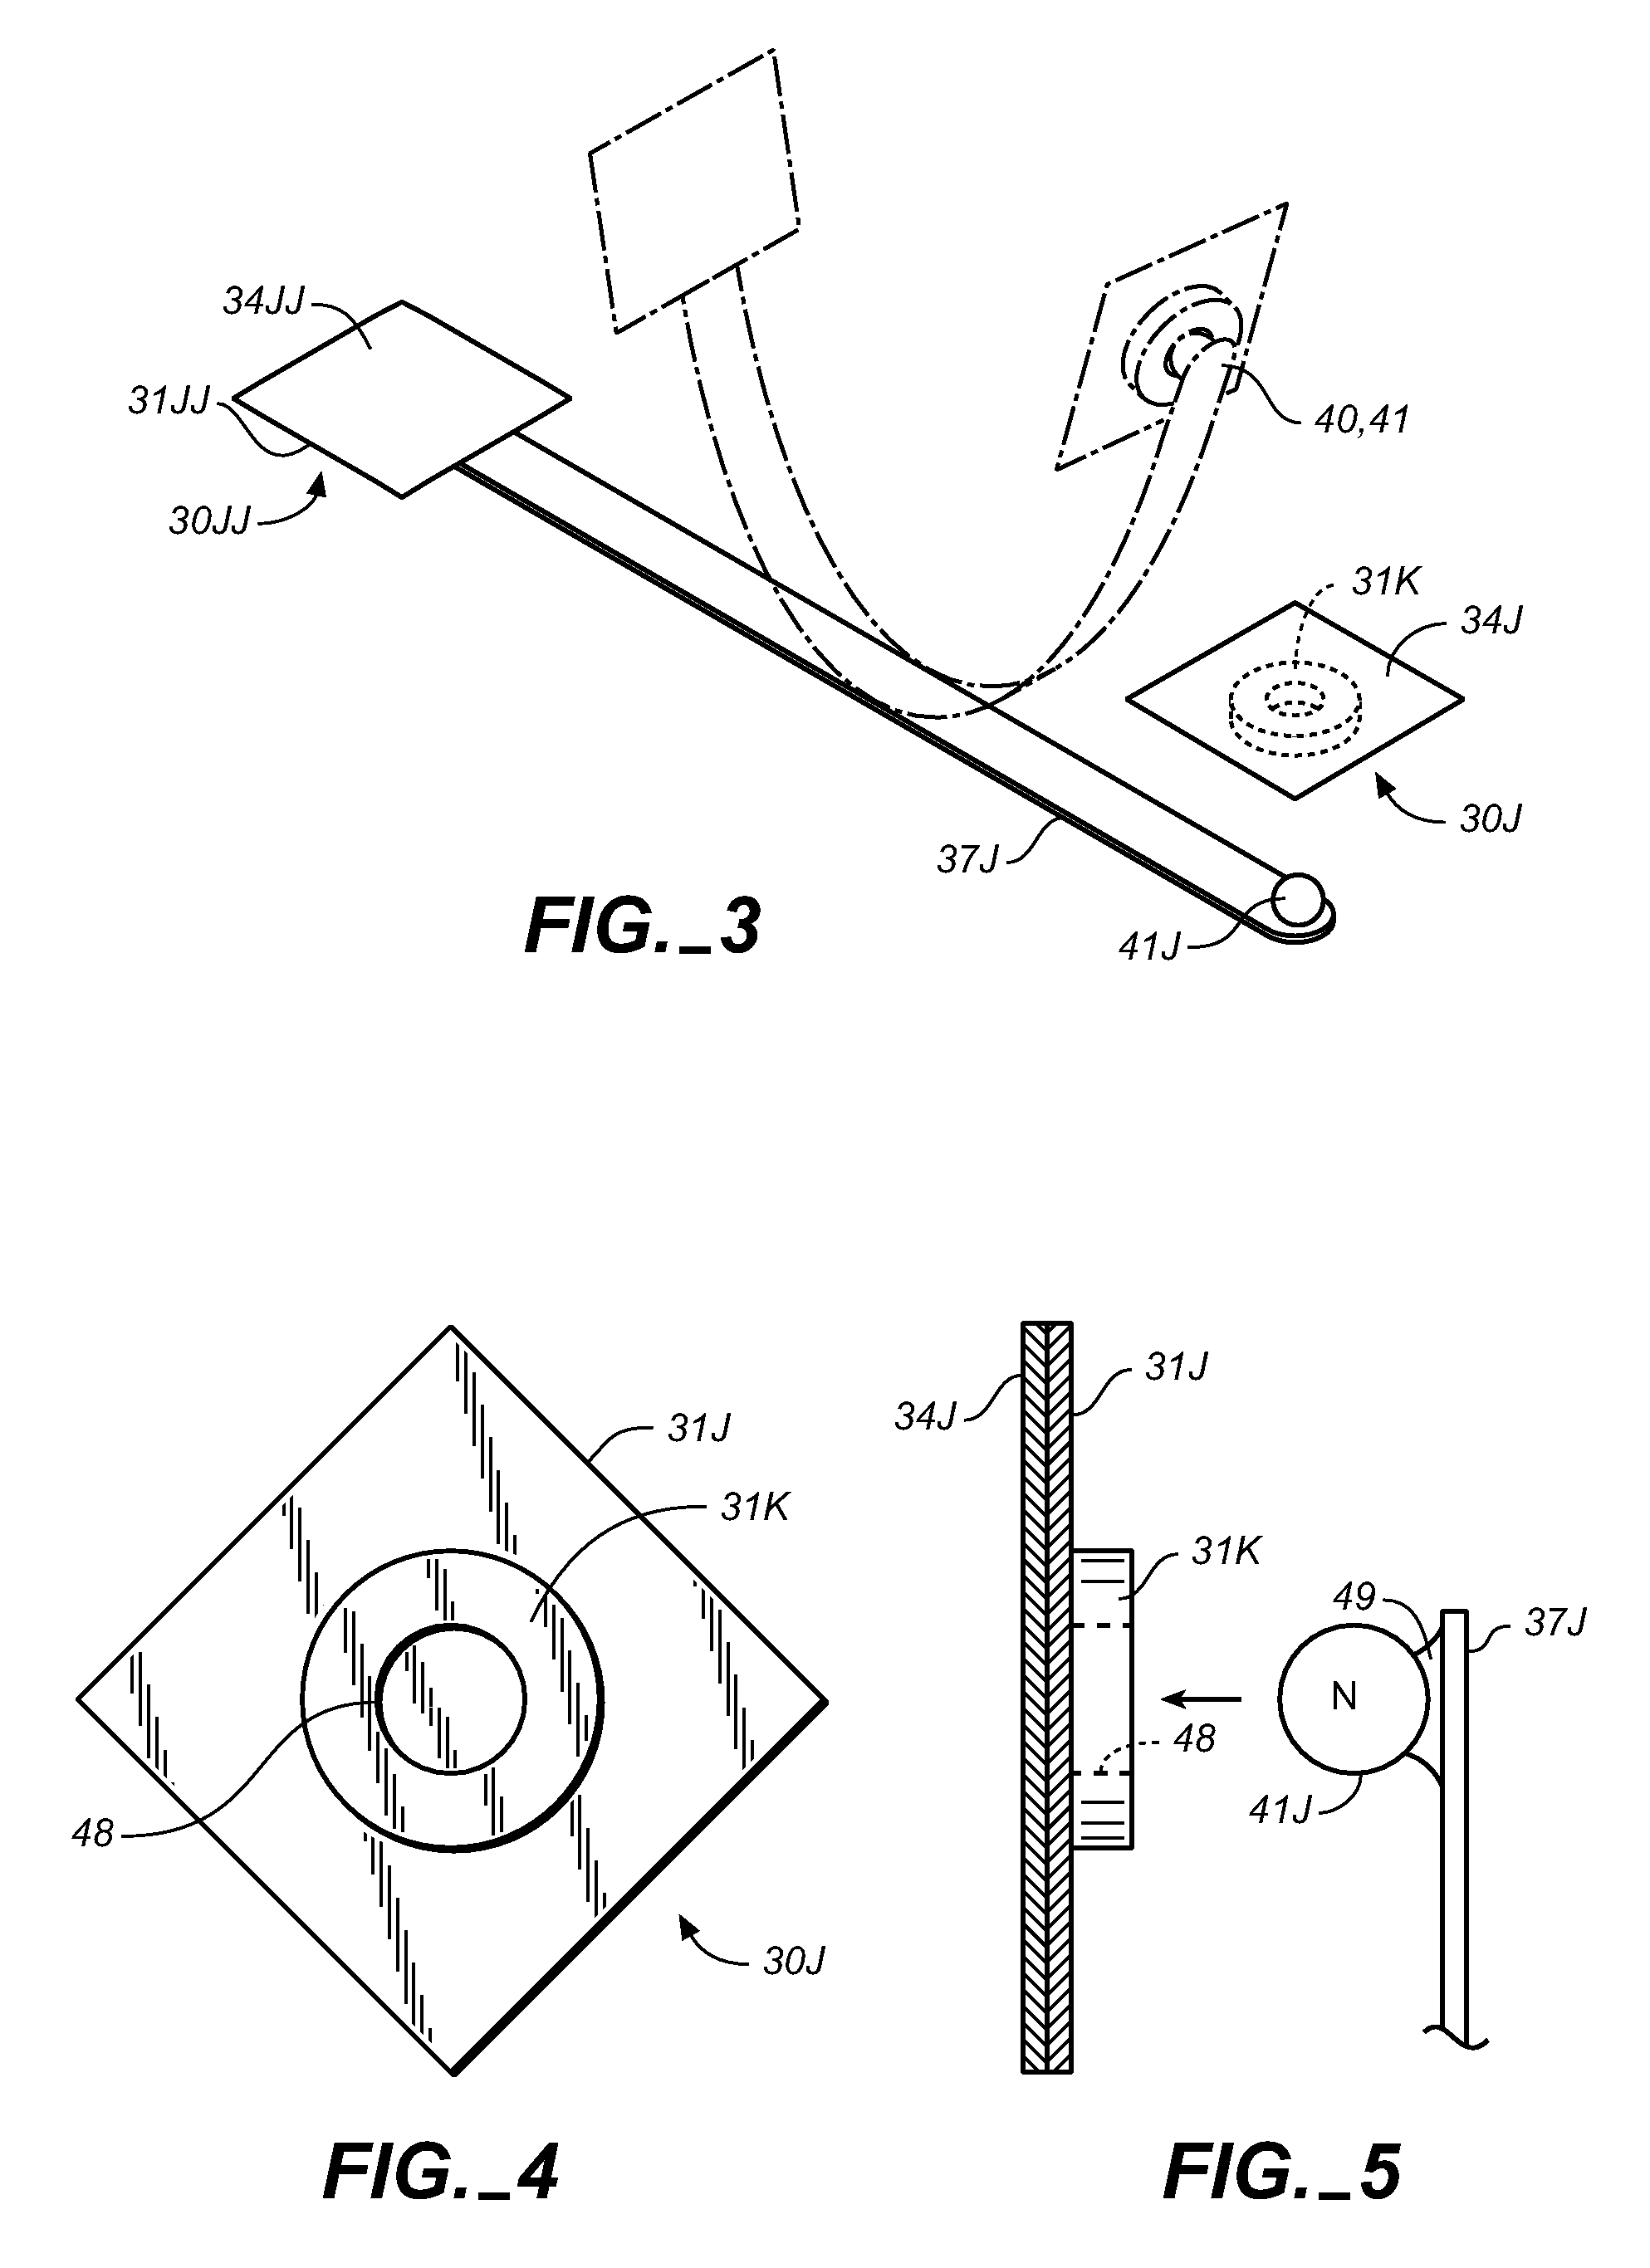 Method and apparatus for treatment of snoring and sleep apnea